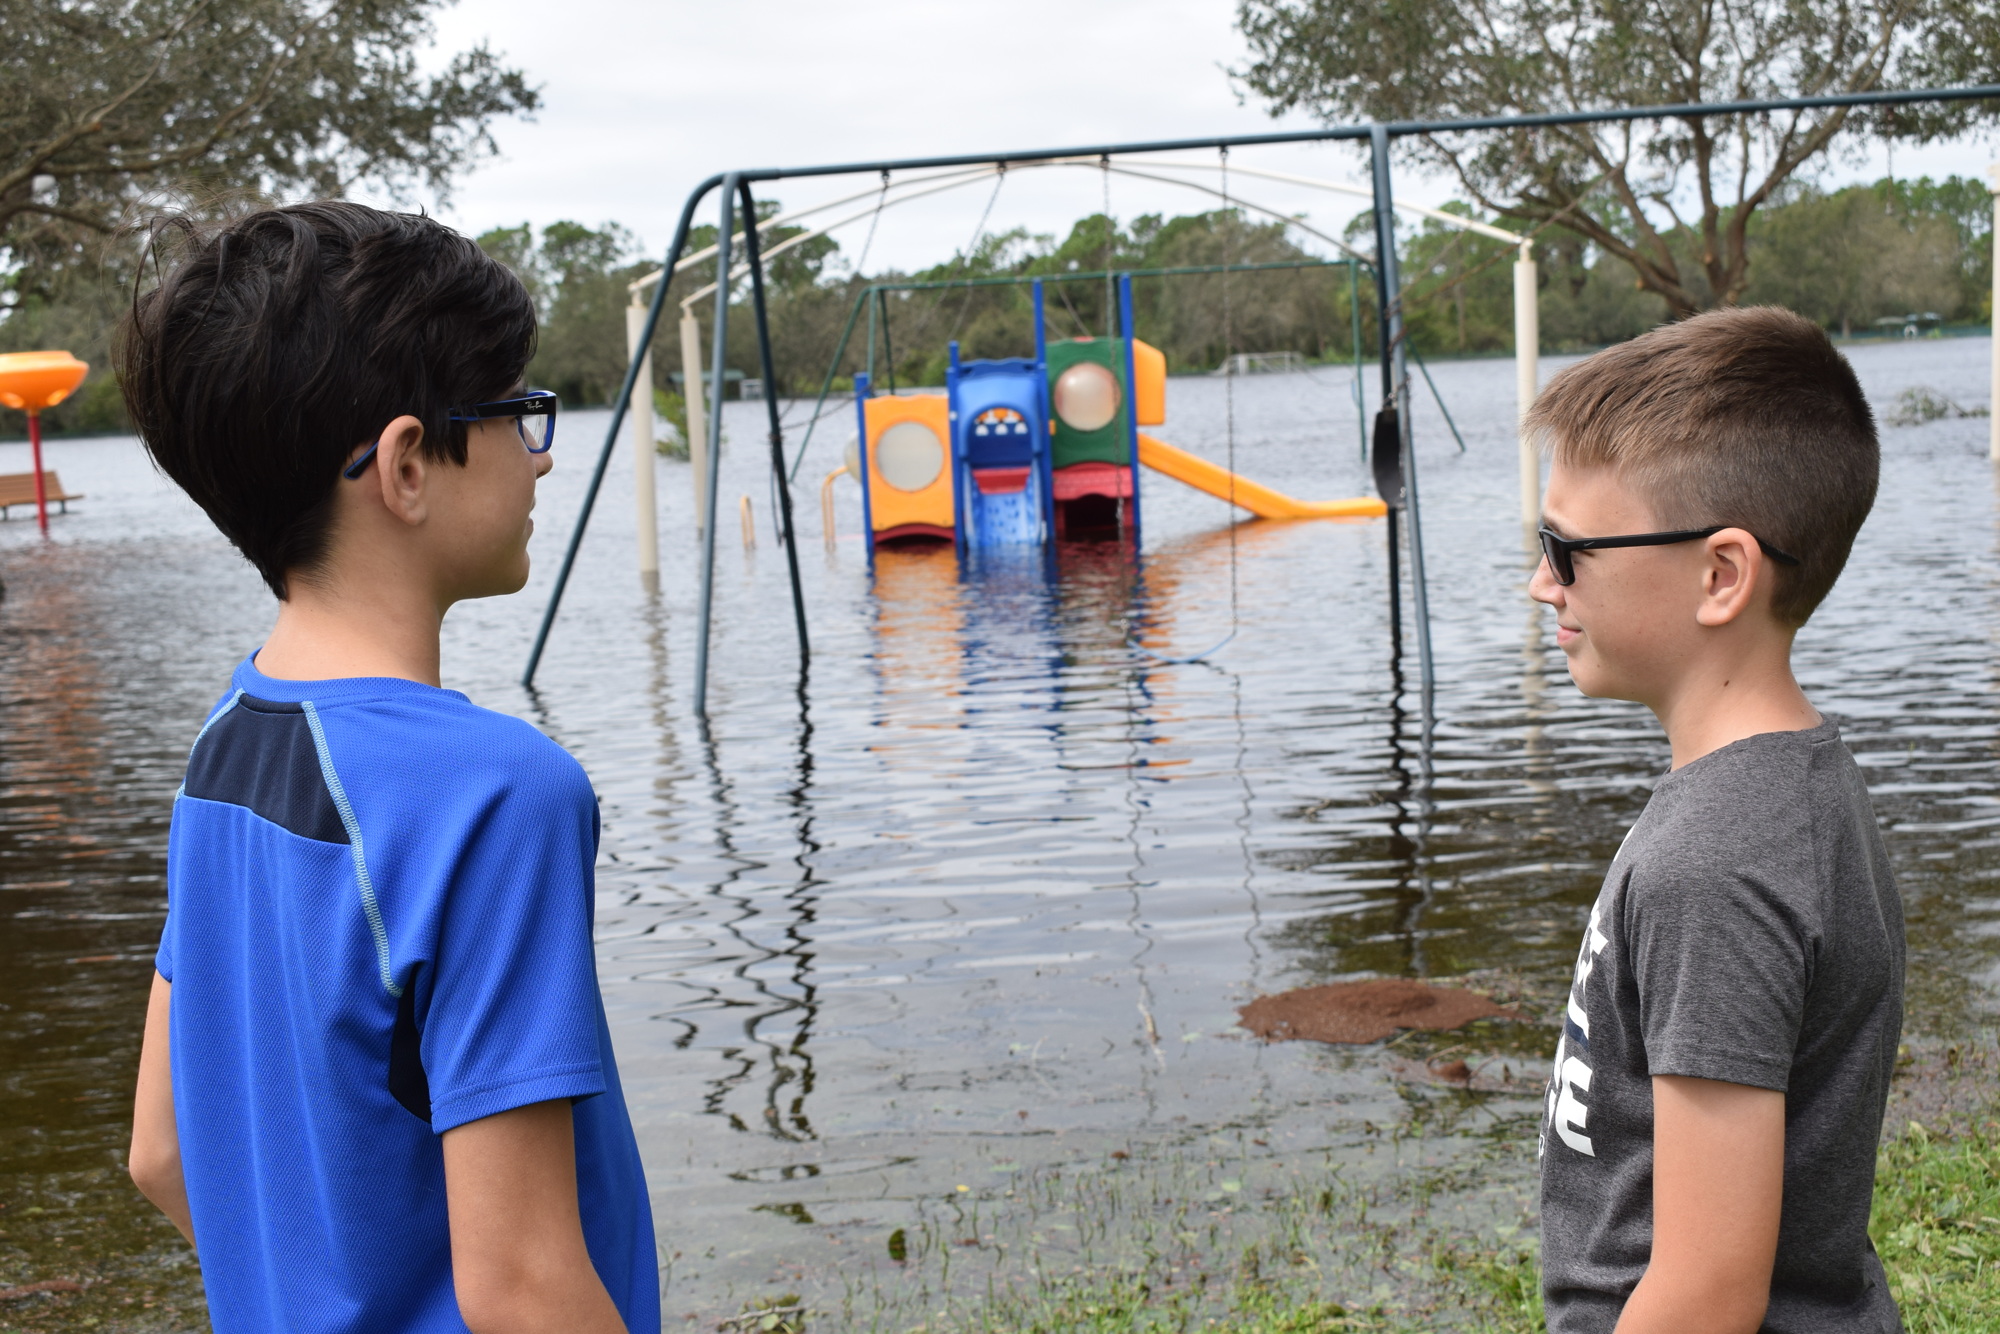 A.J. Sirek, 12, and Noah Sirek, 10, check out the flooded playground at Greenbrook Adventure Park in Lakewood Ranch around 12:45 p.m. Thursday.  (Photo by Jay Heater)